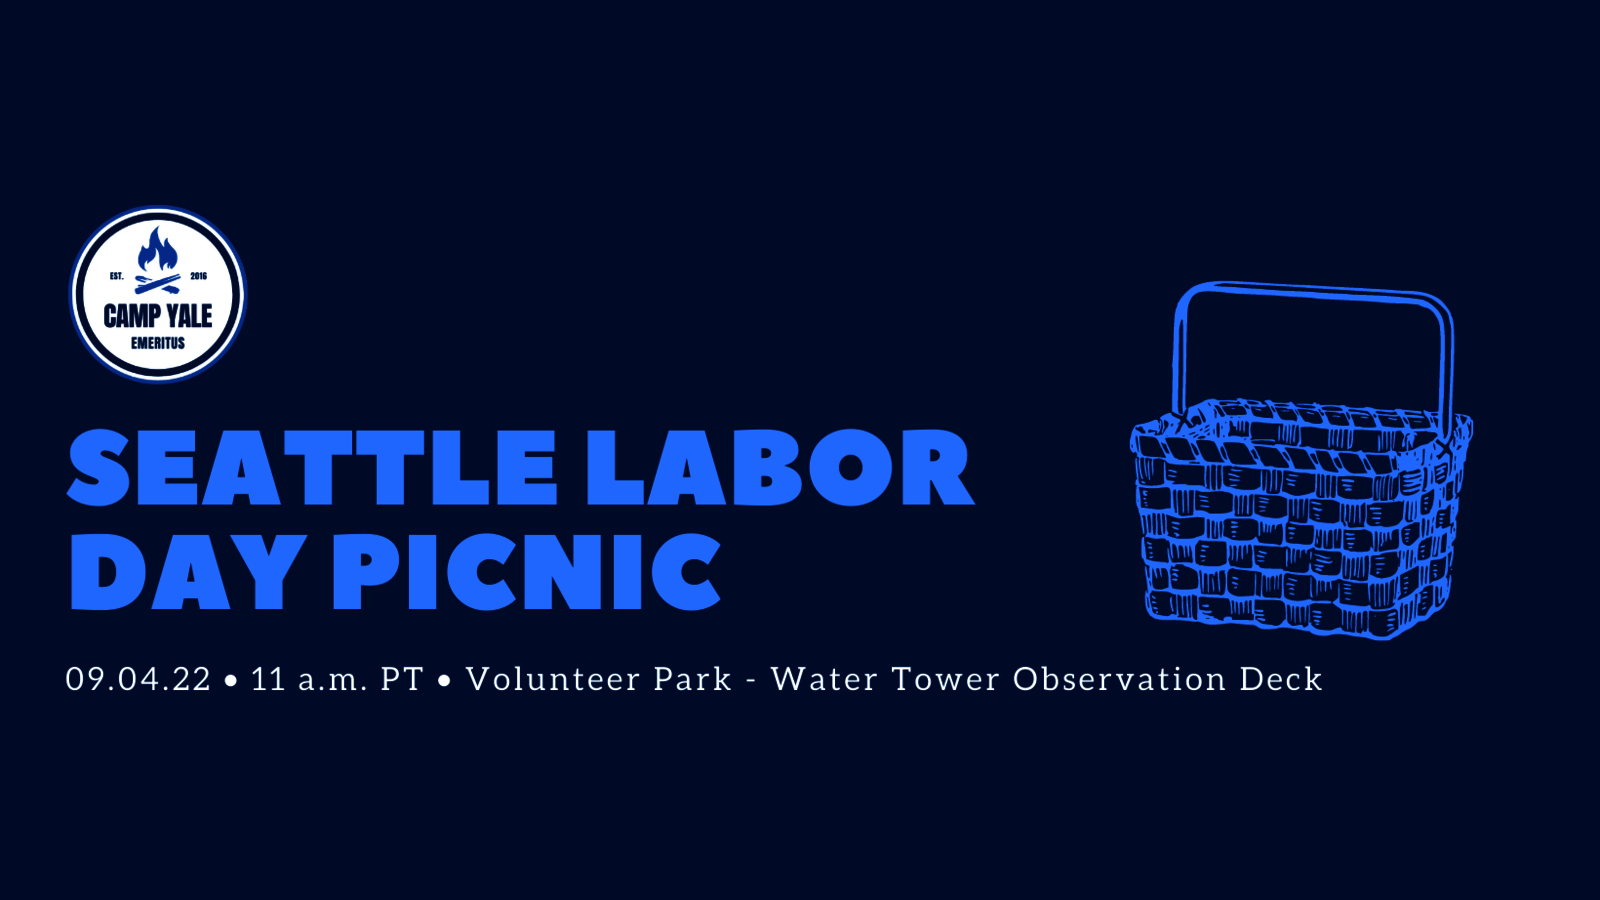 A graphic with a picnic basket, the Camp Yale logo, the name, date and location of the event.